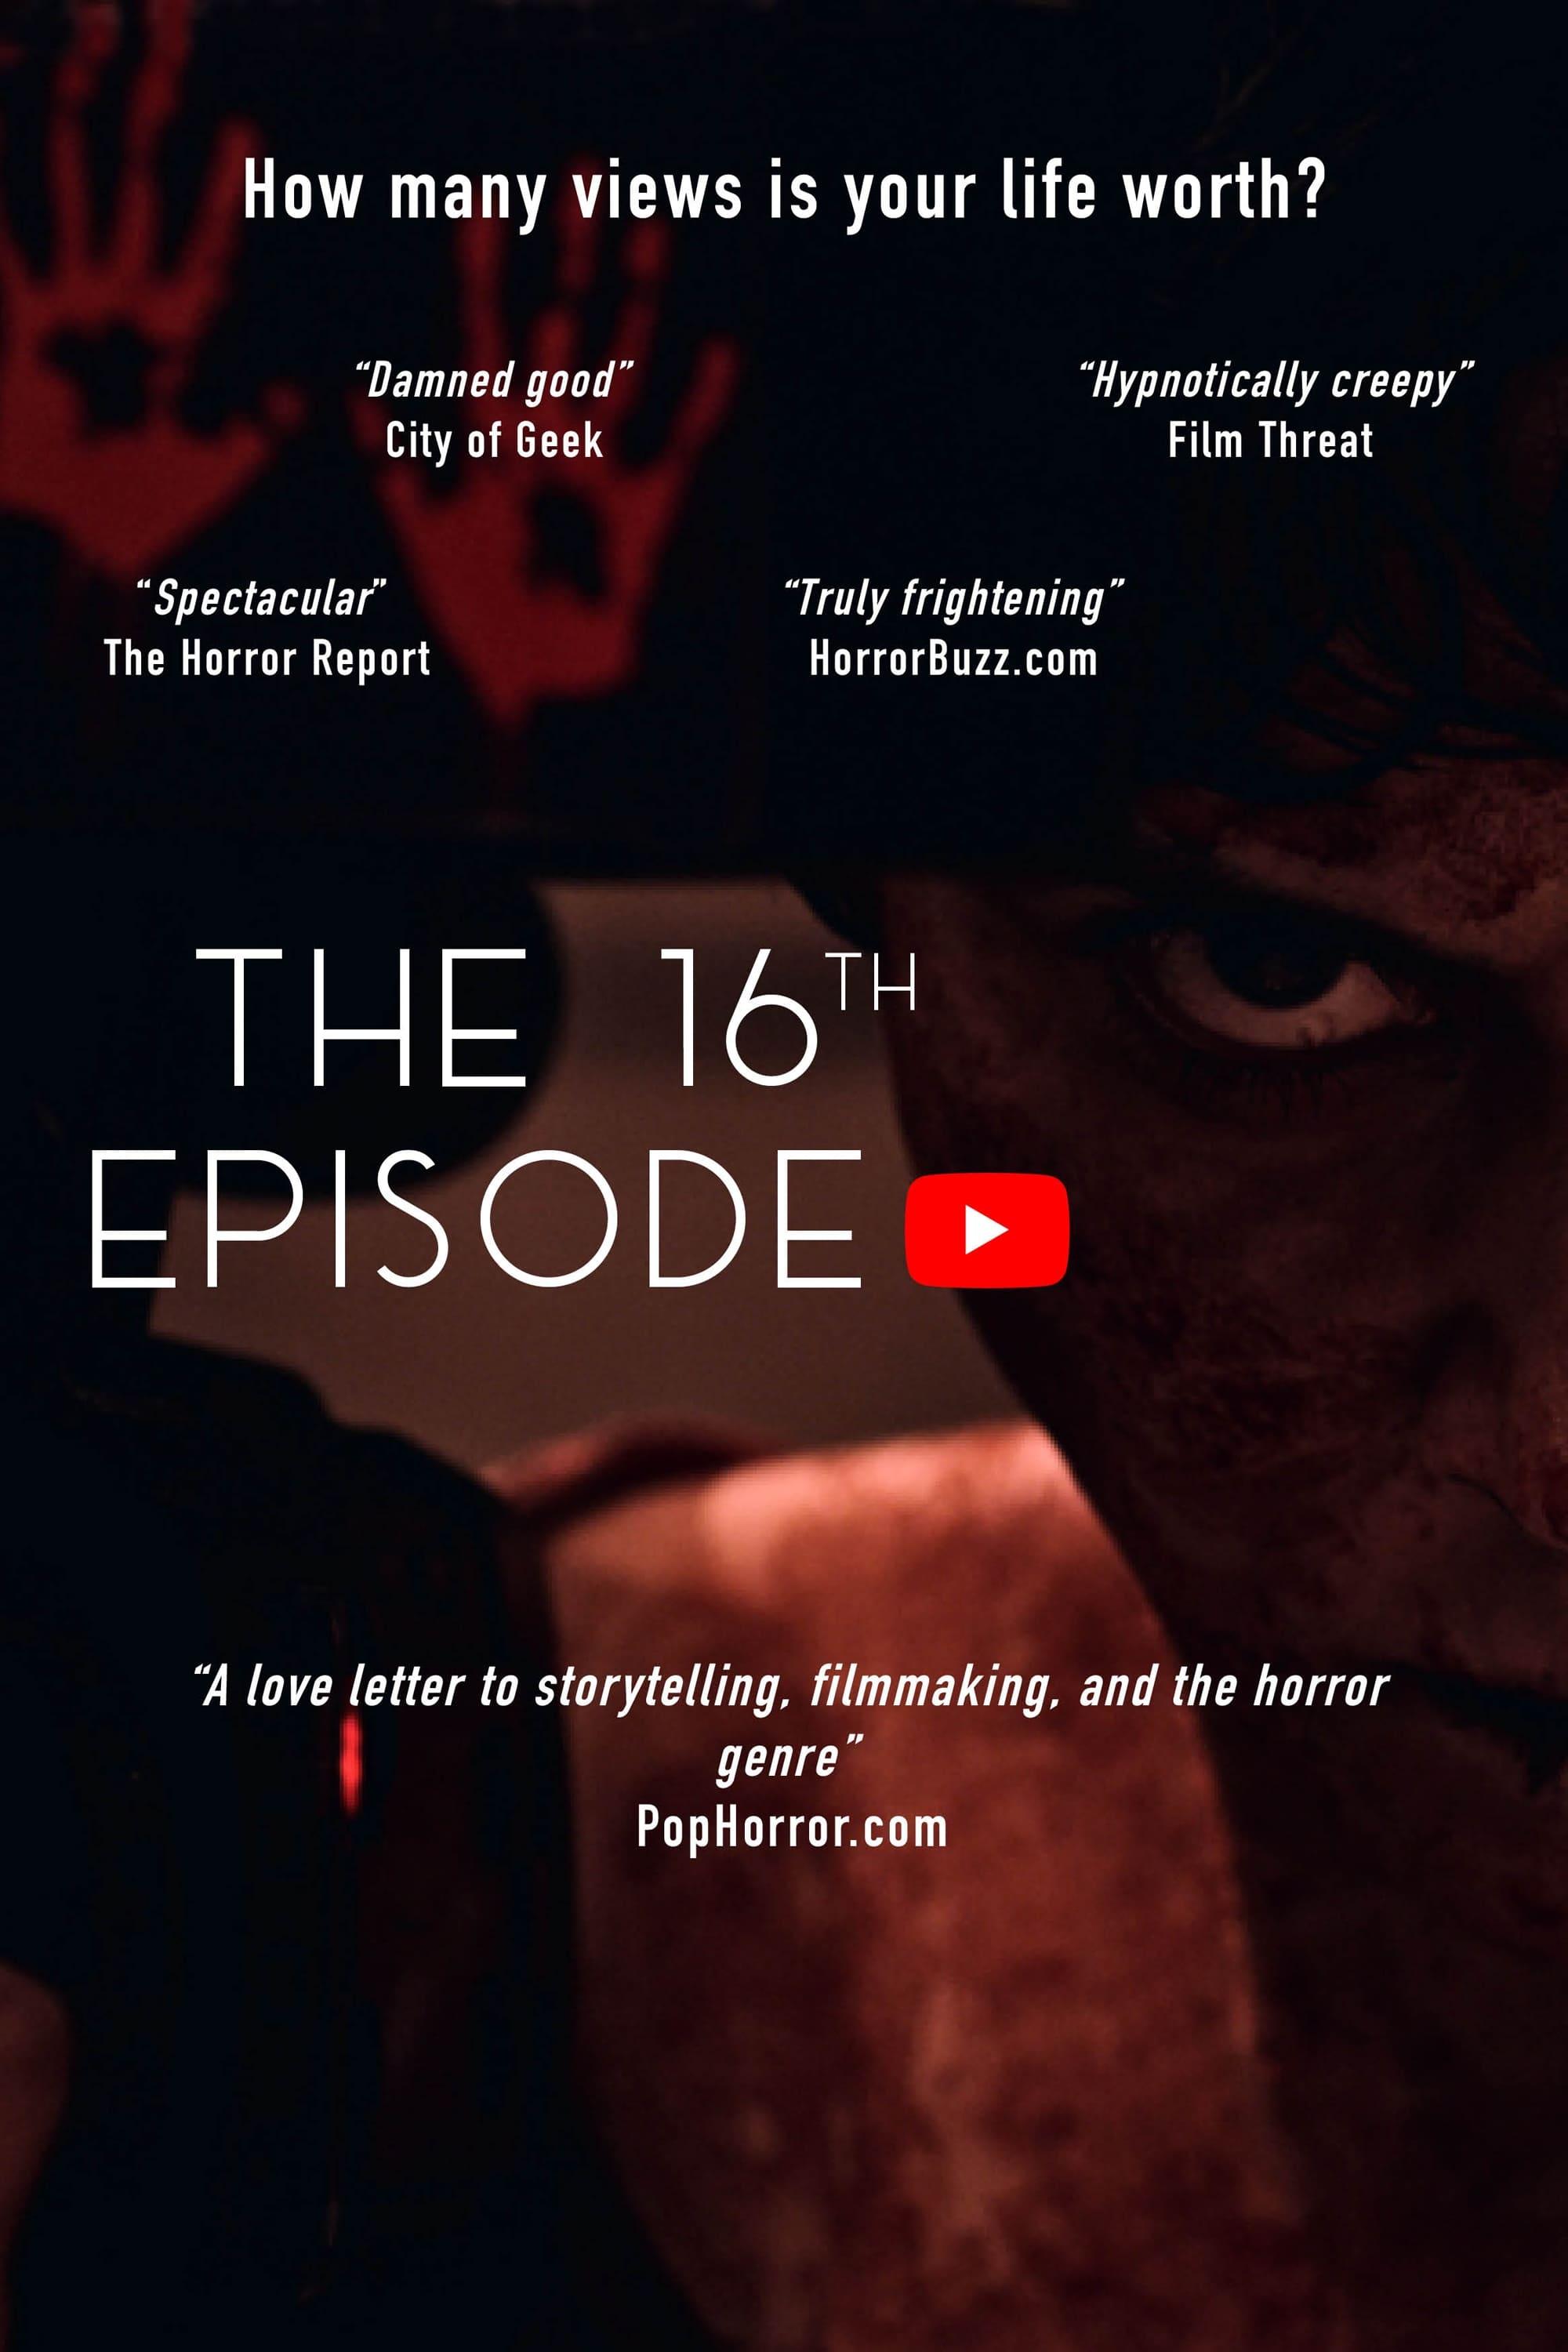 The 16th Episode poster